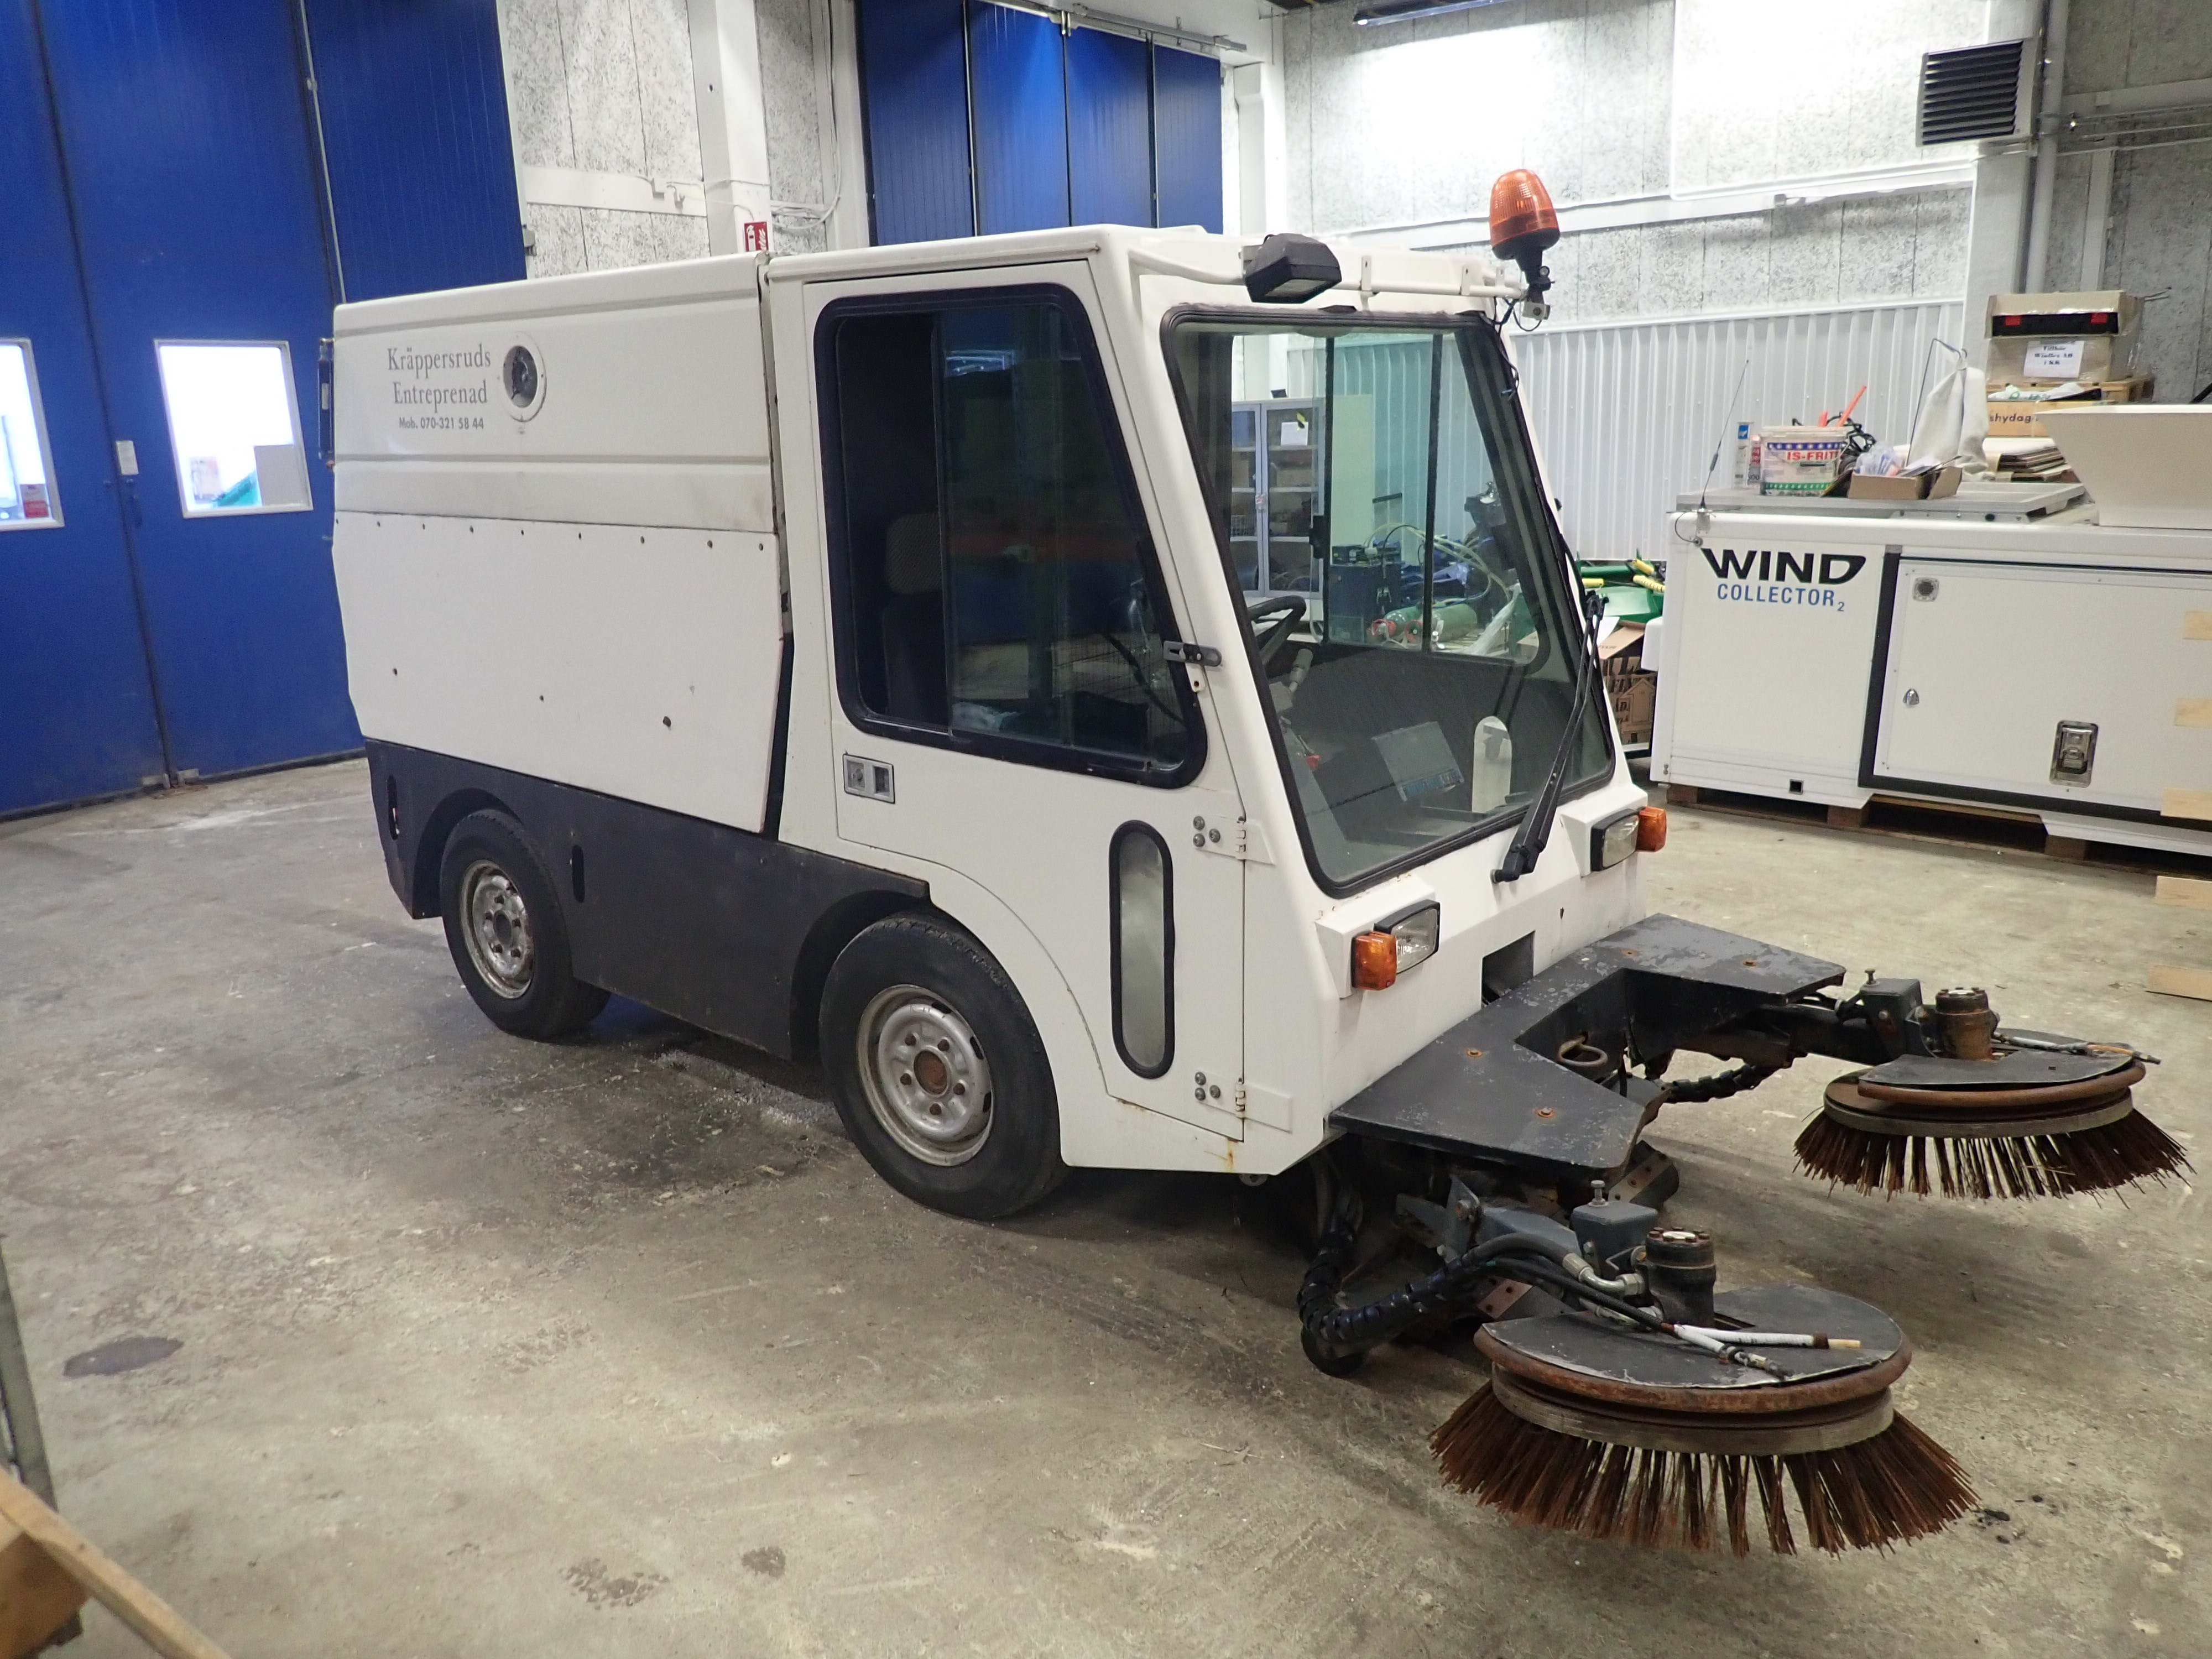 Fireplace Sweeper Awesome Sweeper Hako Citymaster 1750 Ps Auction We Value the